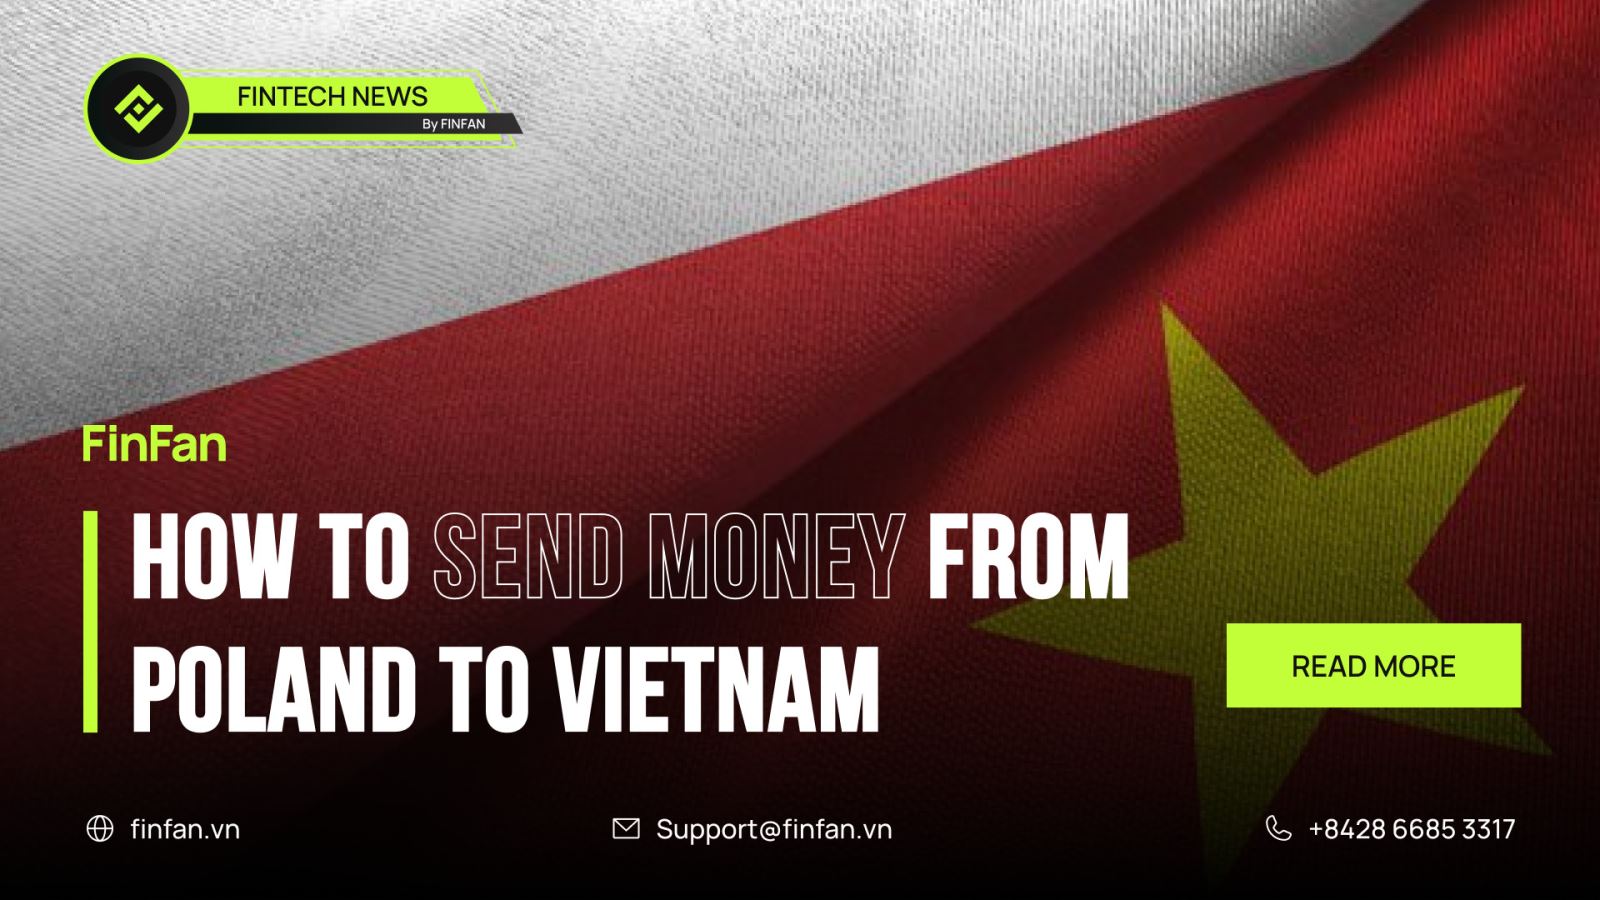 How to send money from Poland to Vietnam?